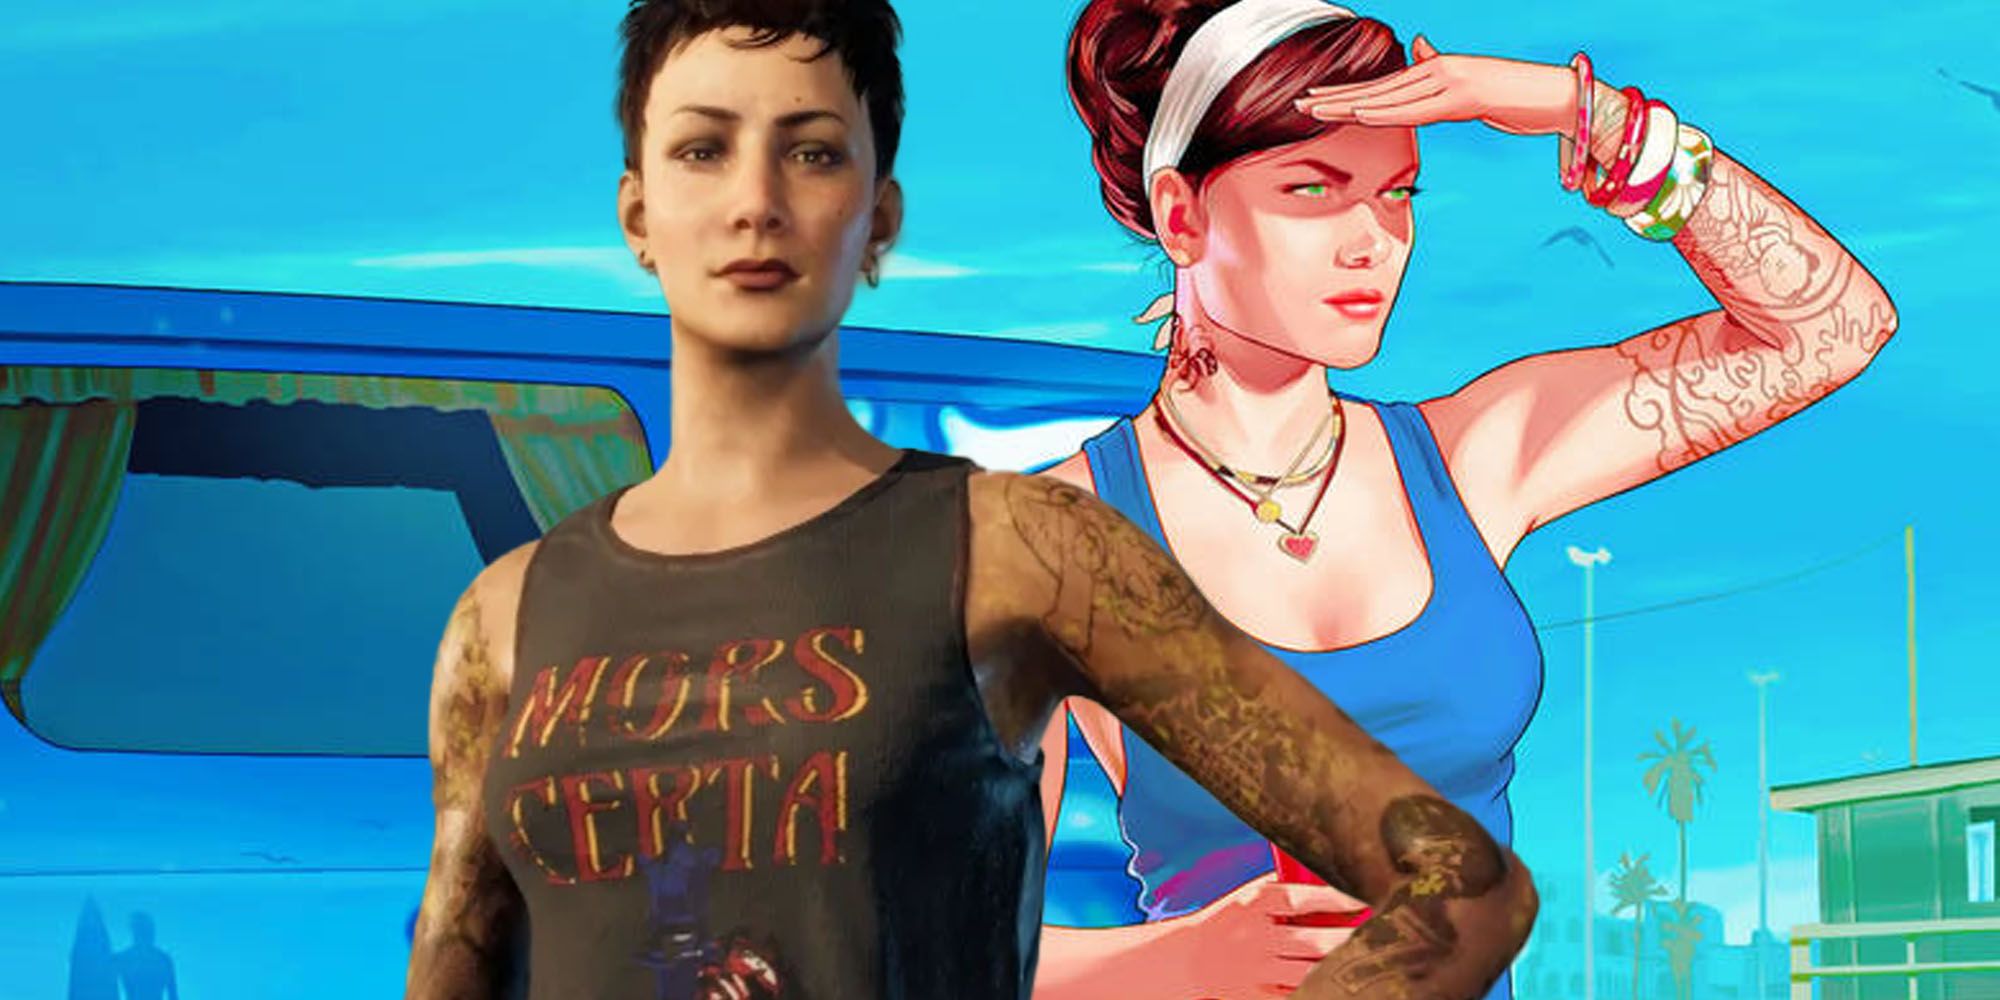 Far Cry 6 Zenia next to a woman from GTA Online loading screen